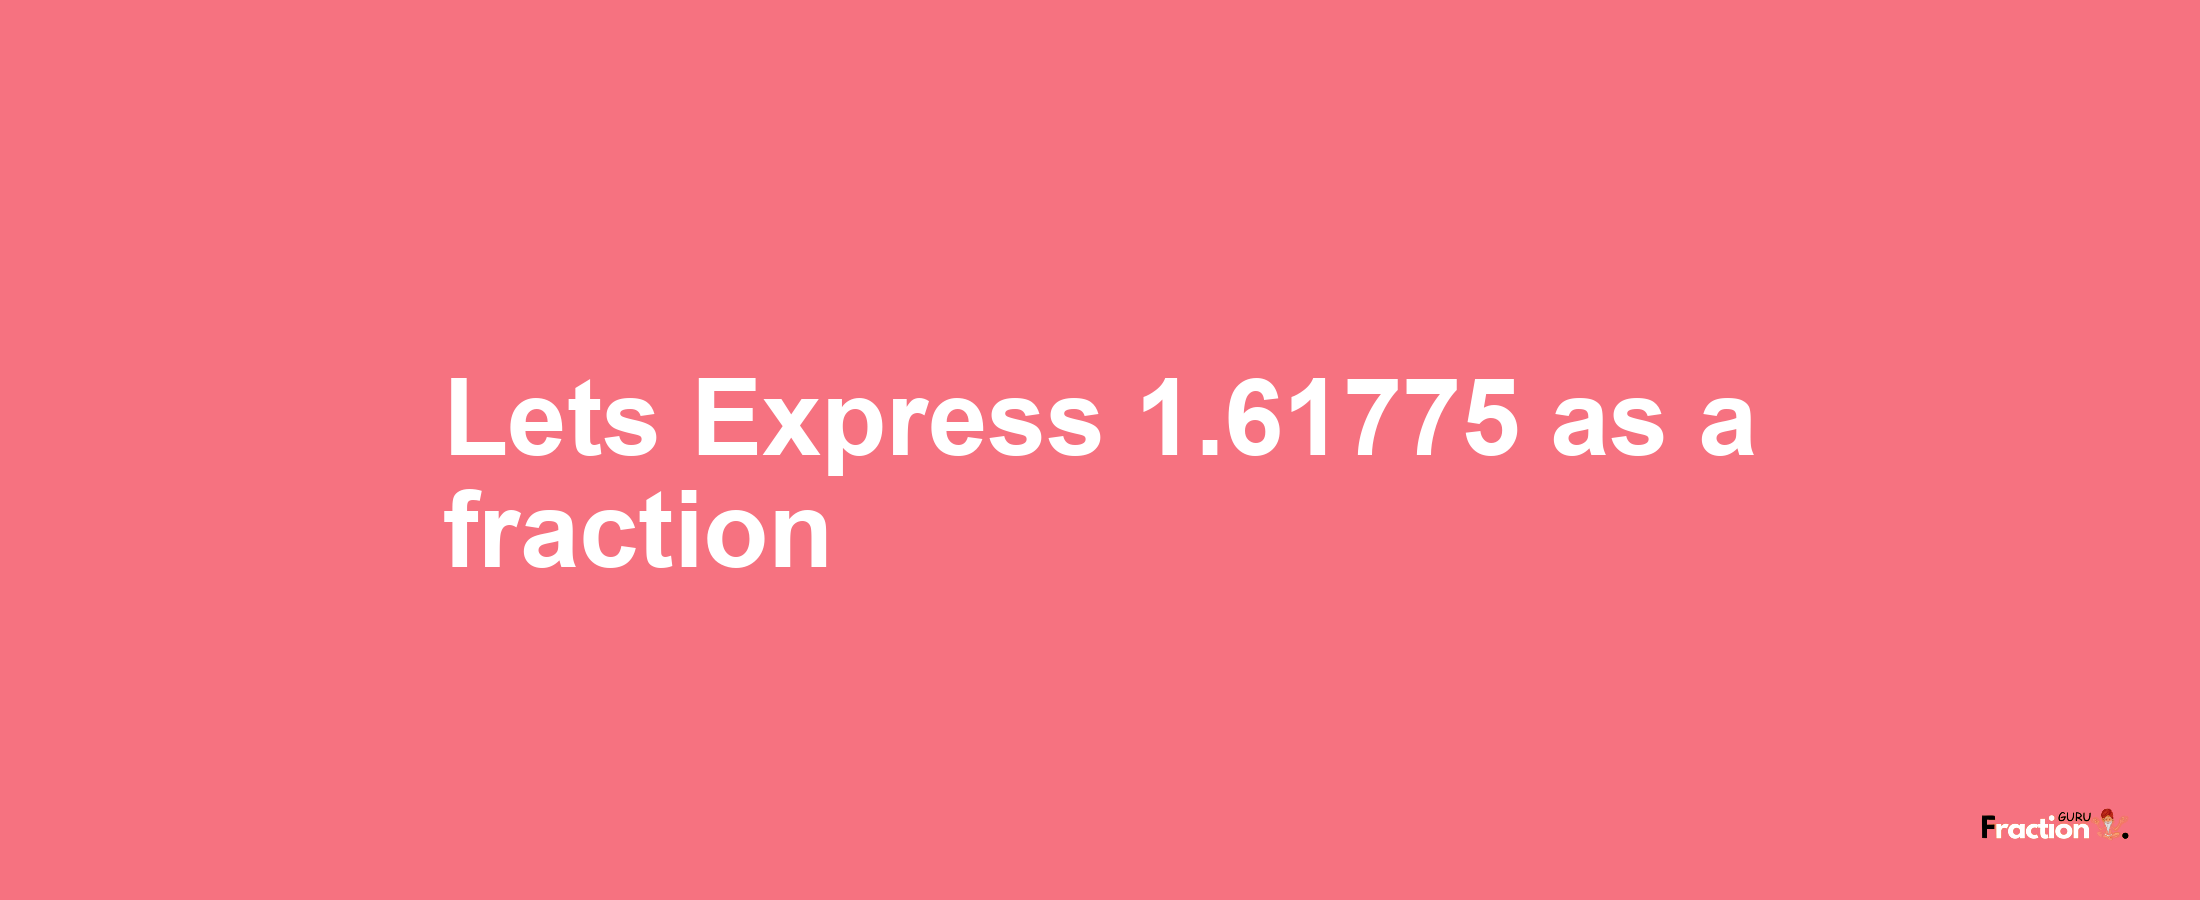 Lets Express 1.61775 as afraction